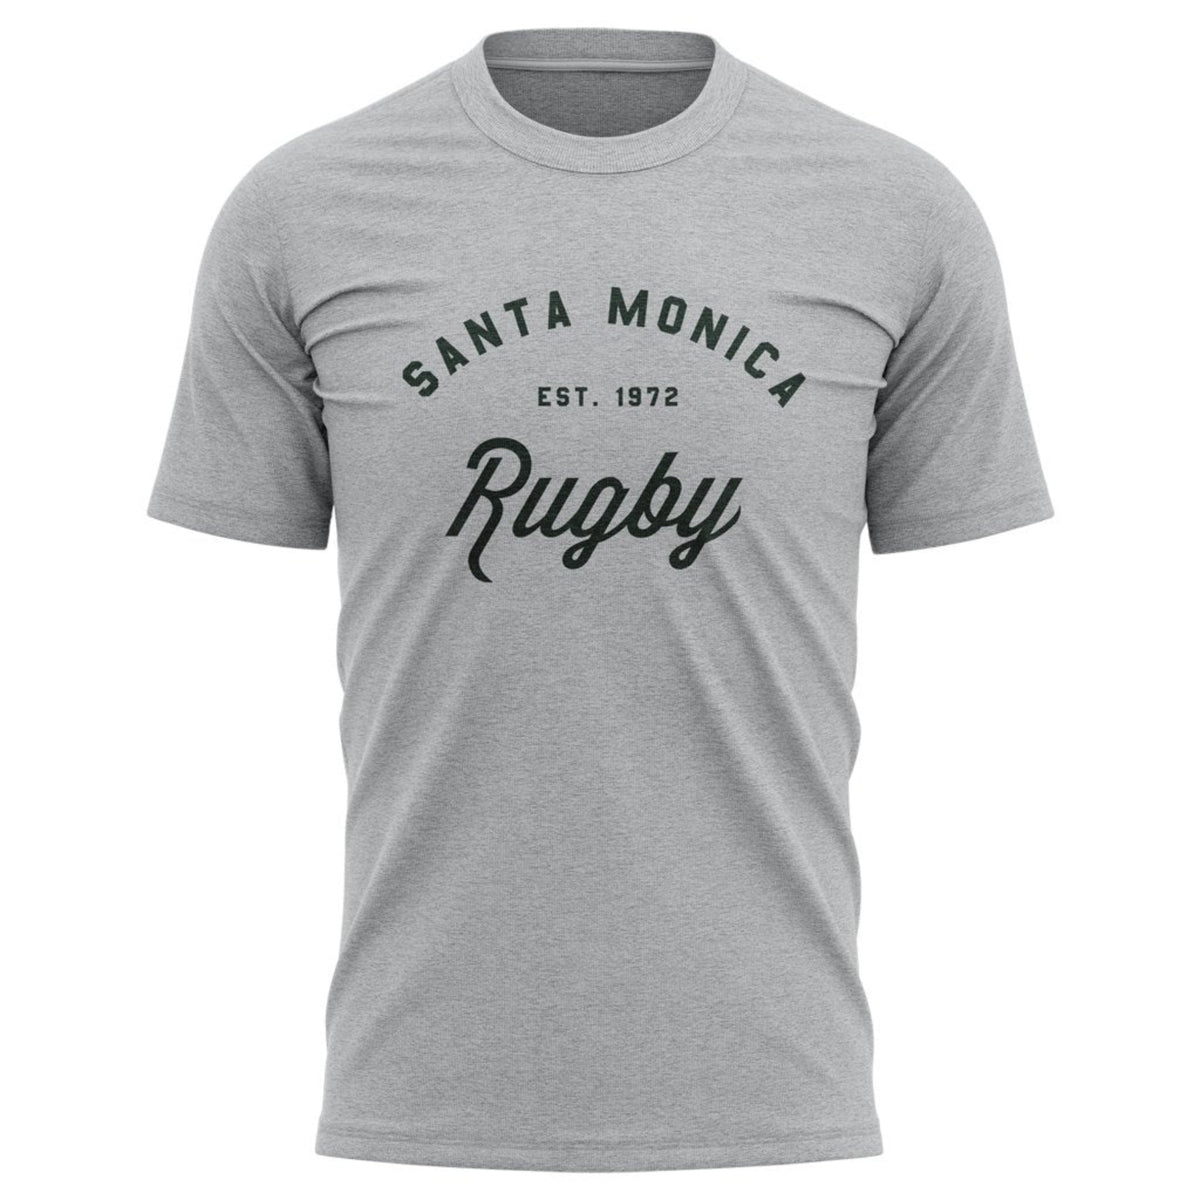 Santa Monica Rugby Club &quot;Classic&quot; Tee - Men&#39;s Black Or Grey - www.therugbyshop.com www.therugbyshop.com MEN&#39;S / ATHLETIC GREY / S XIX Brands TEES Santa Monica Rugby Club &quot;Classic&quot; Tee - Men&#39;s Black Or Grey